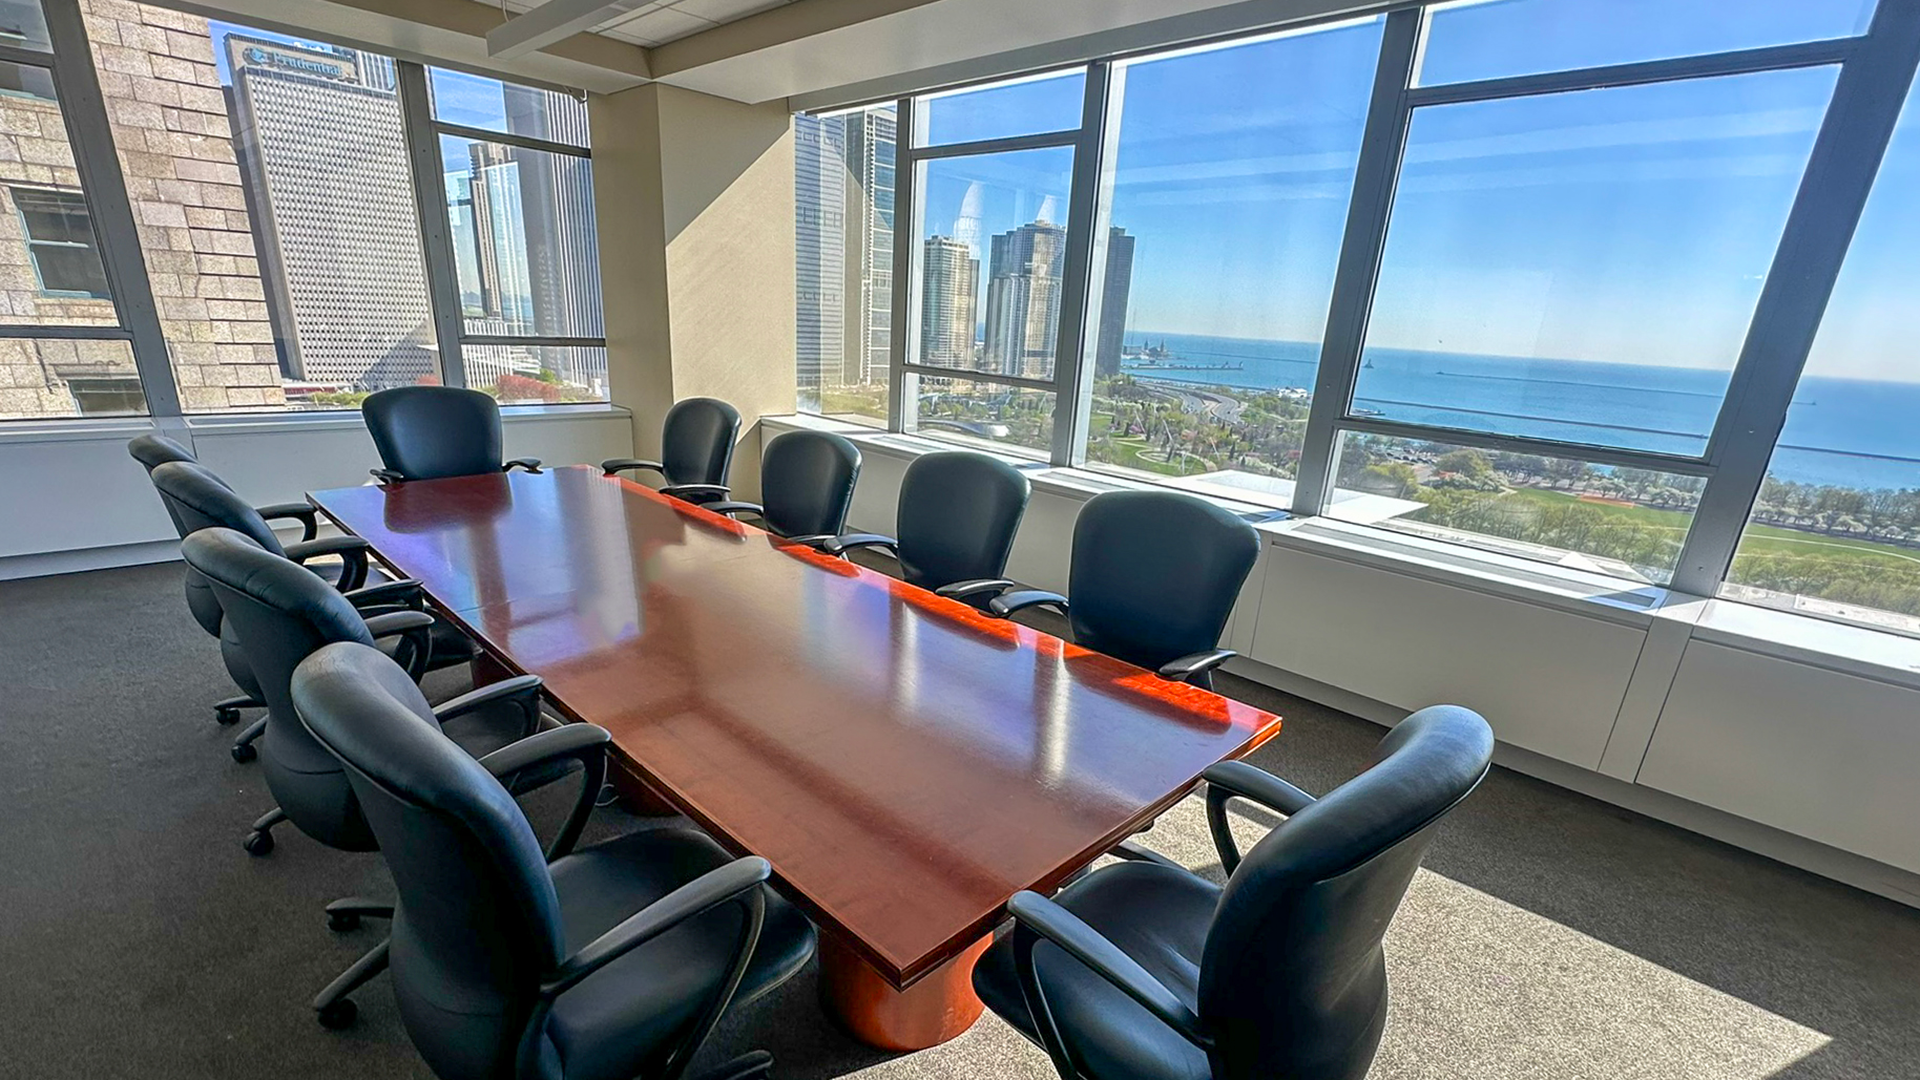 Conference room with views of Lake Michigan